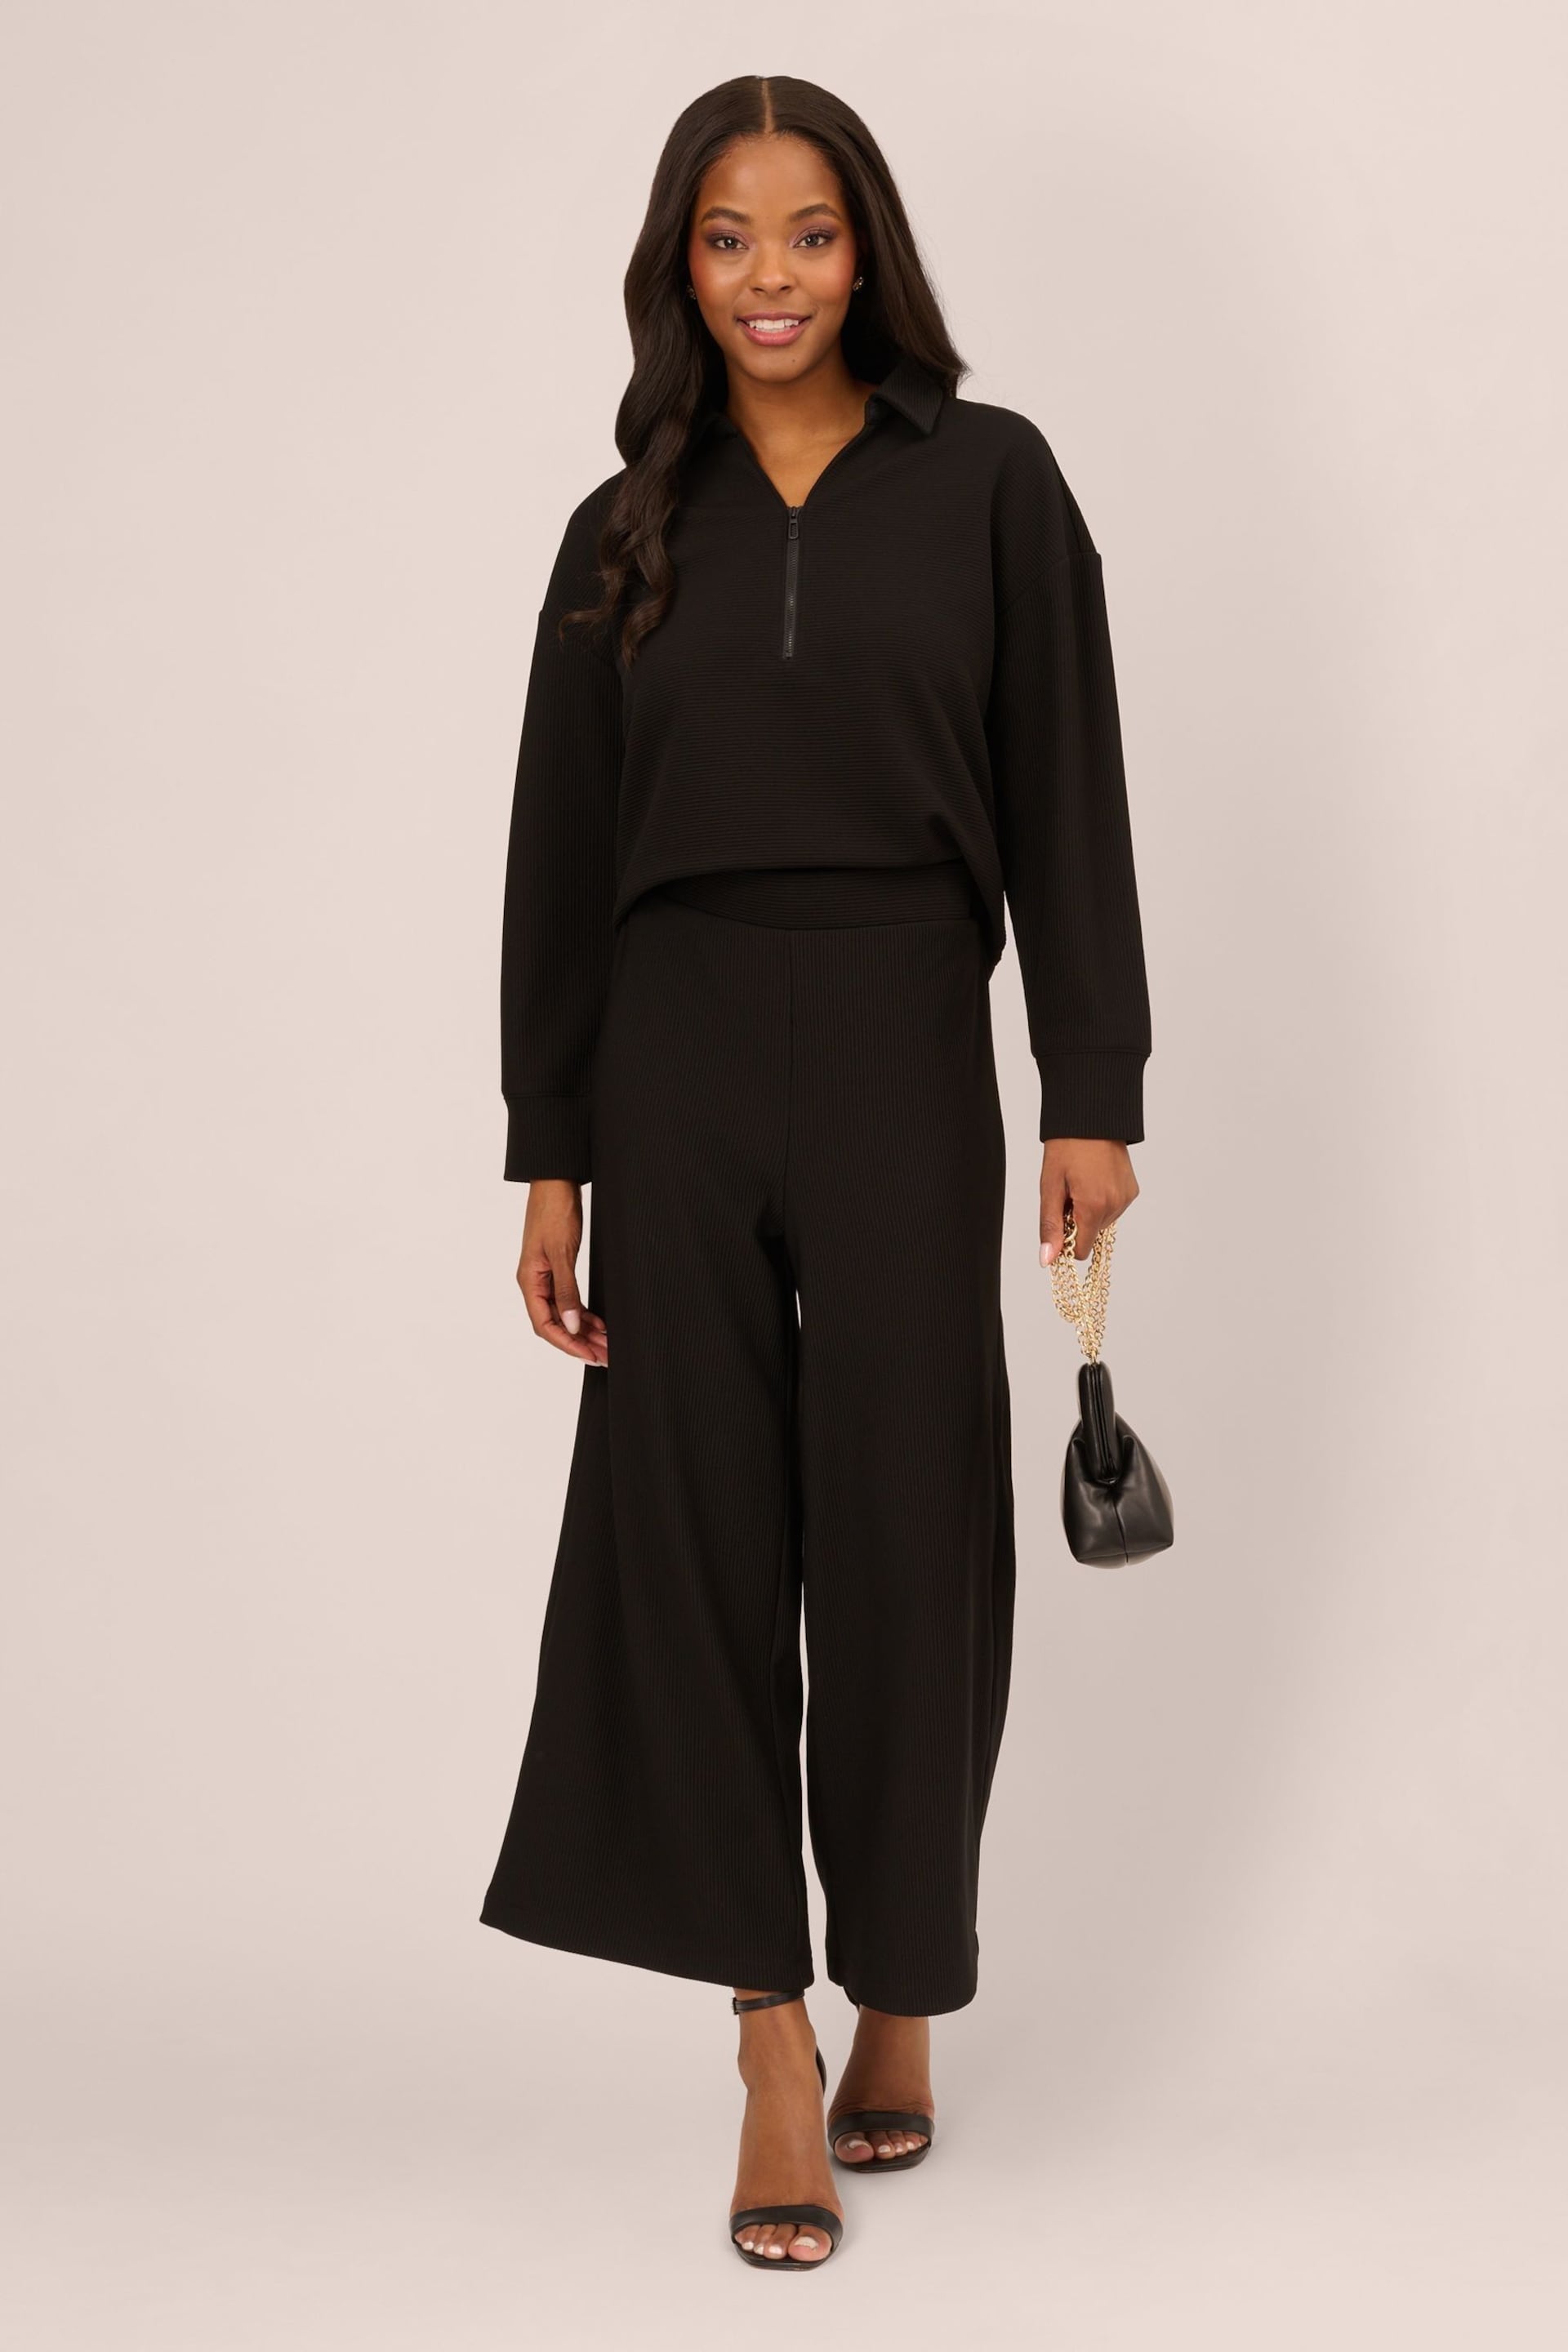 Adrianna Papell Ottoman Rib Knit Pull On Black Trousers - Image 3 of 7